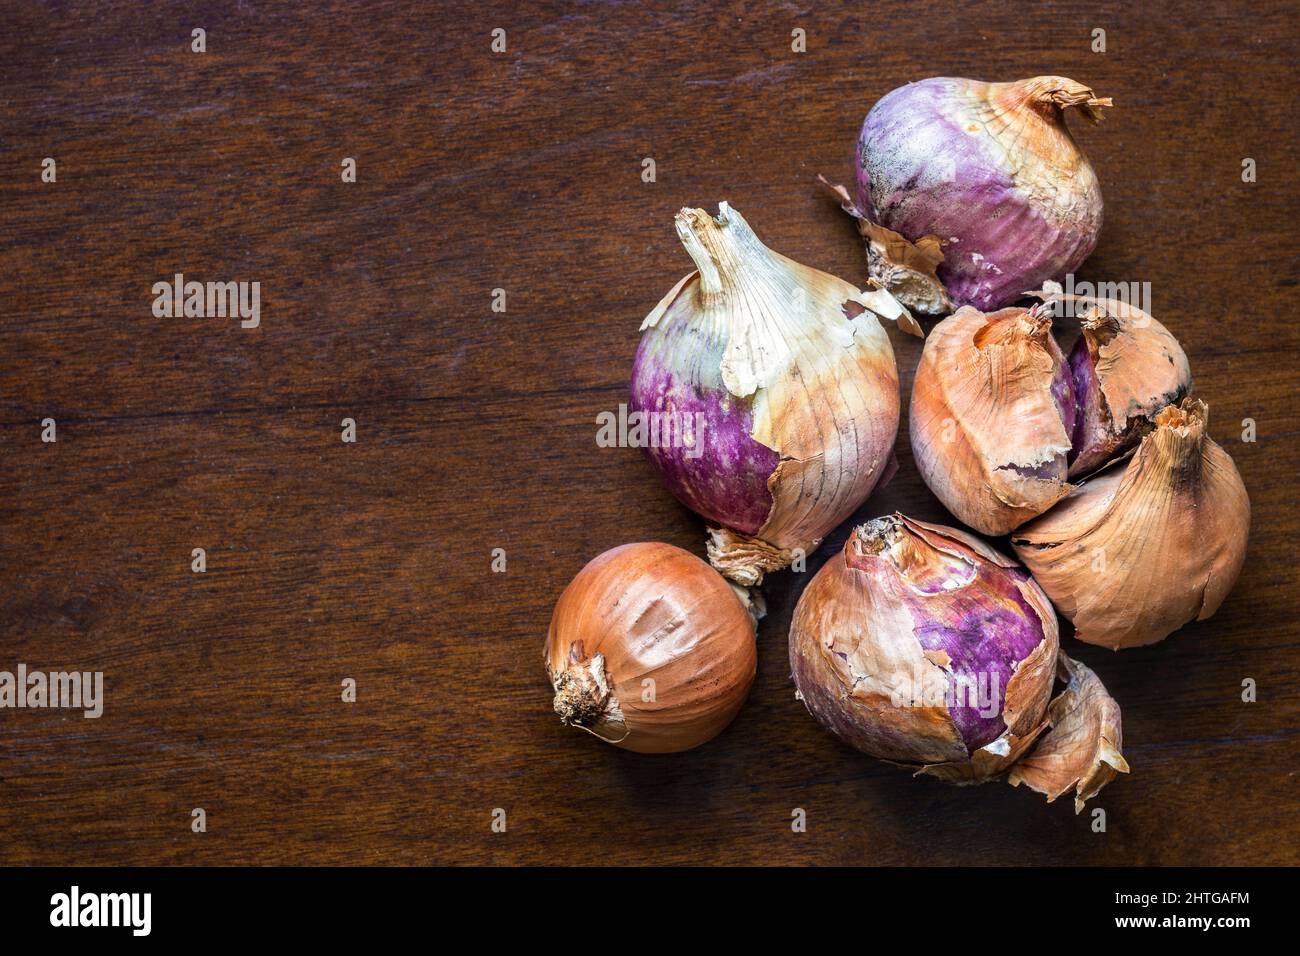 Brown and purple shallots, Allium Cepa onions, on rustic table Stock Photo